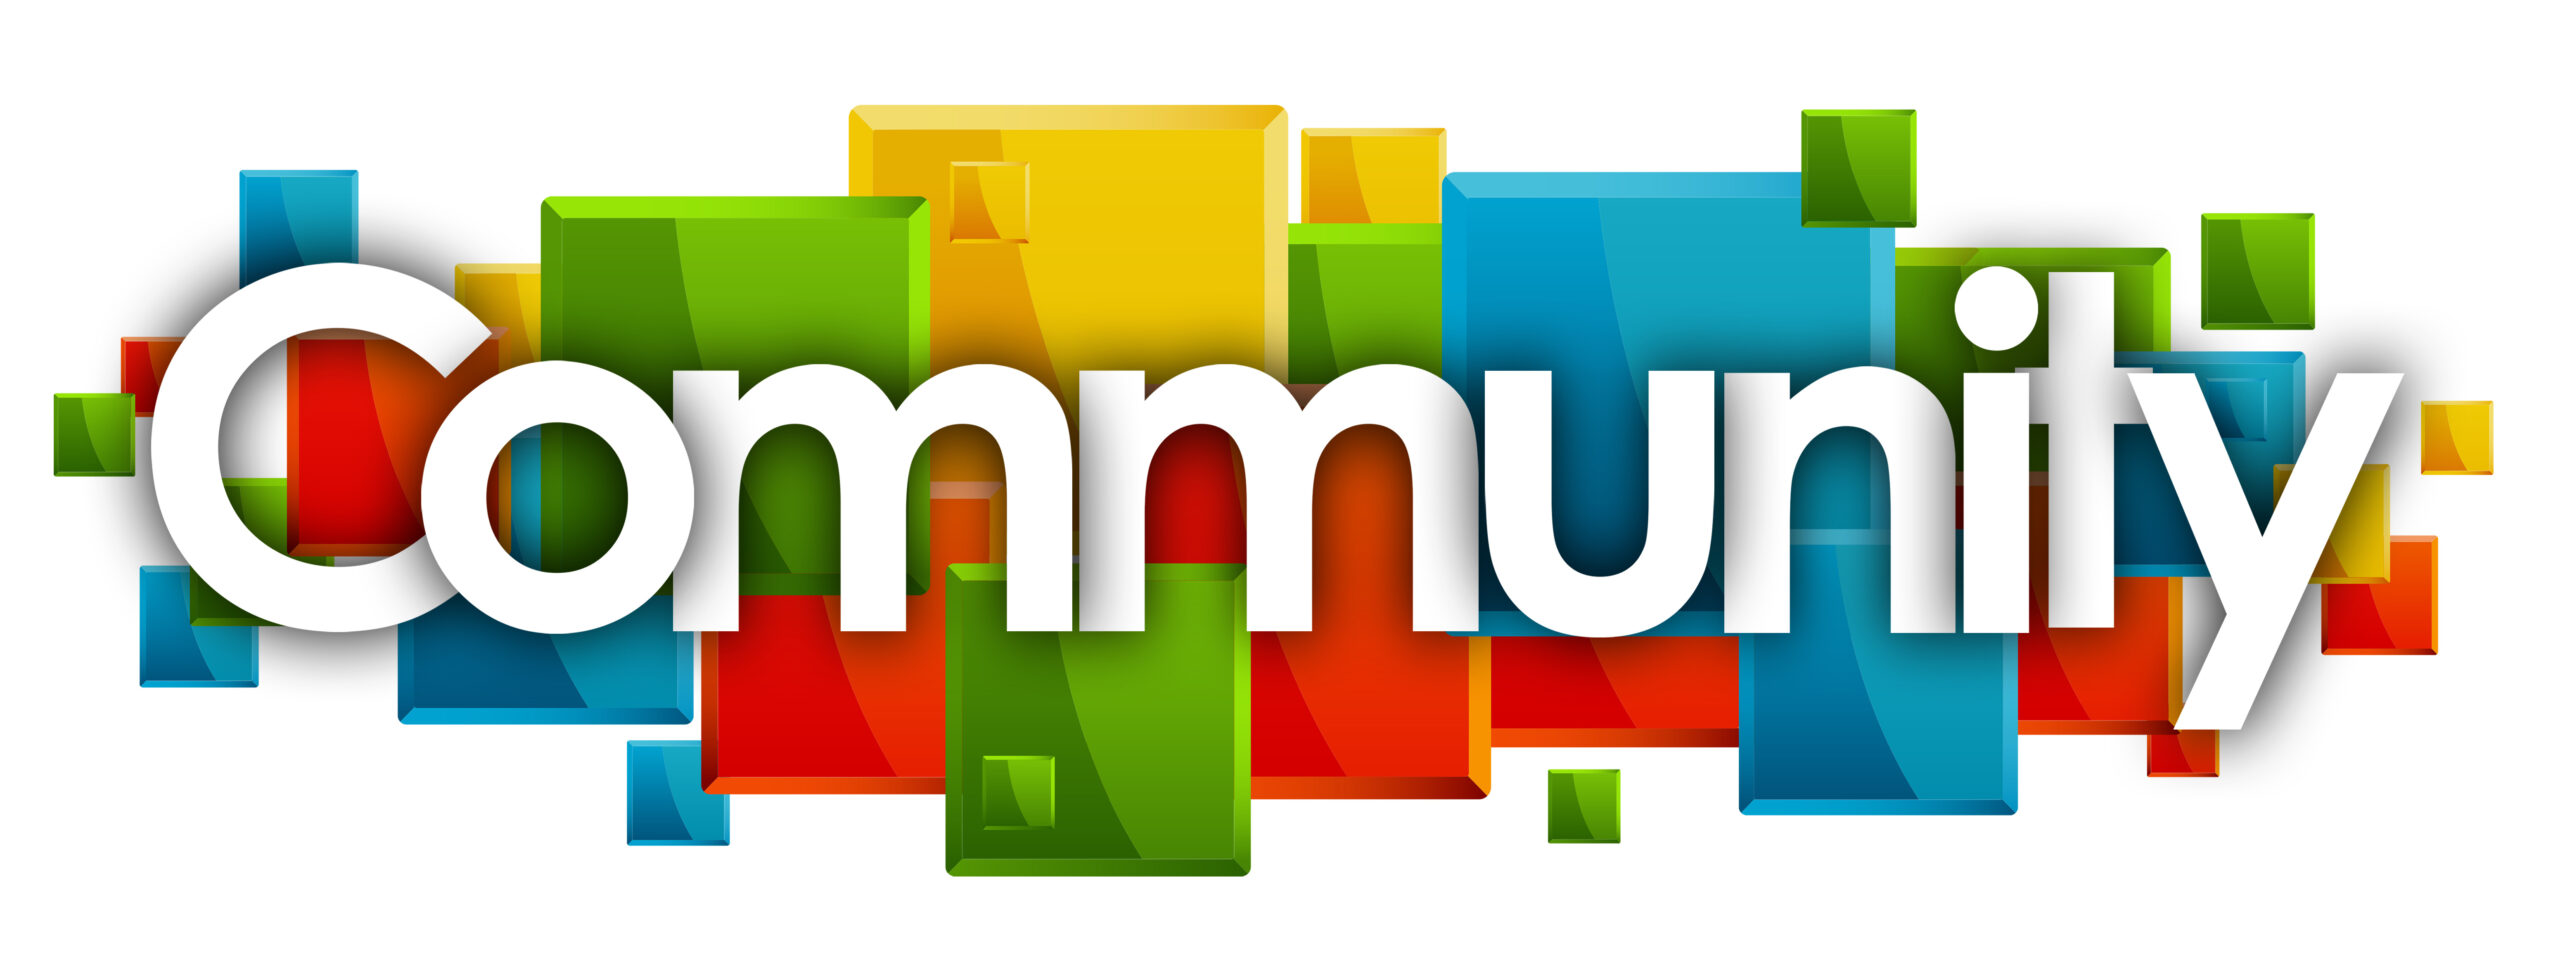 community in colored rectangles background